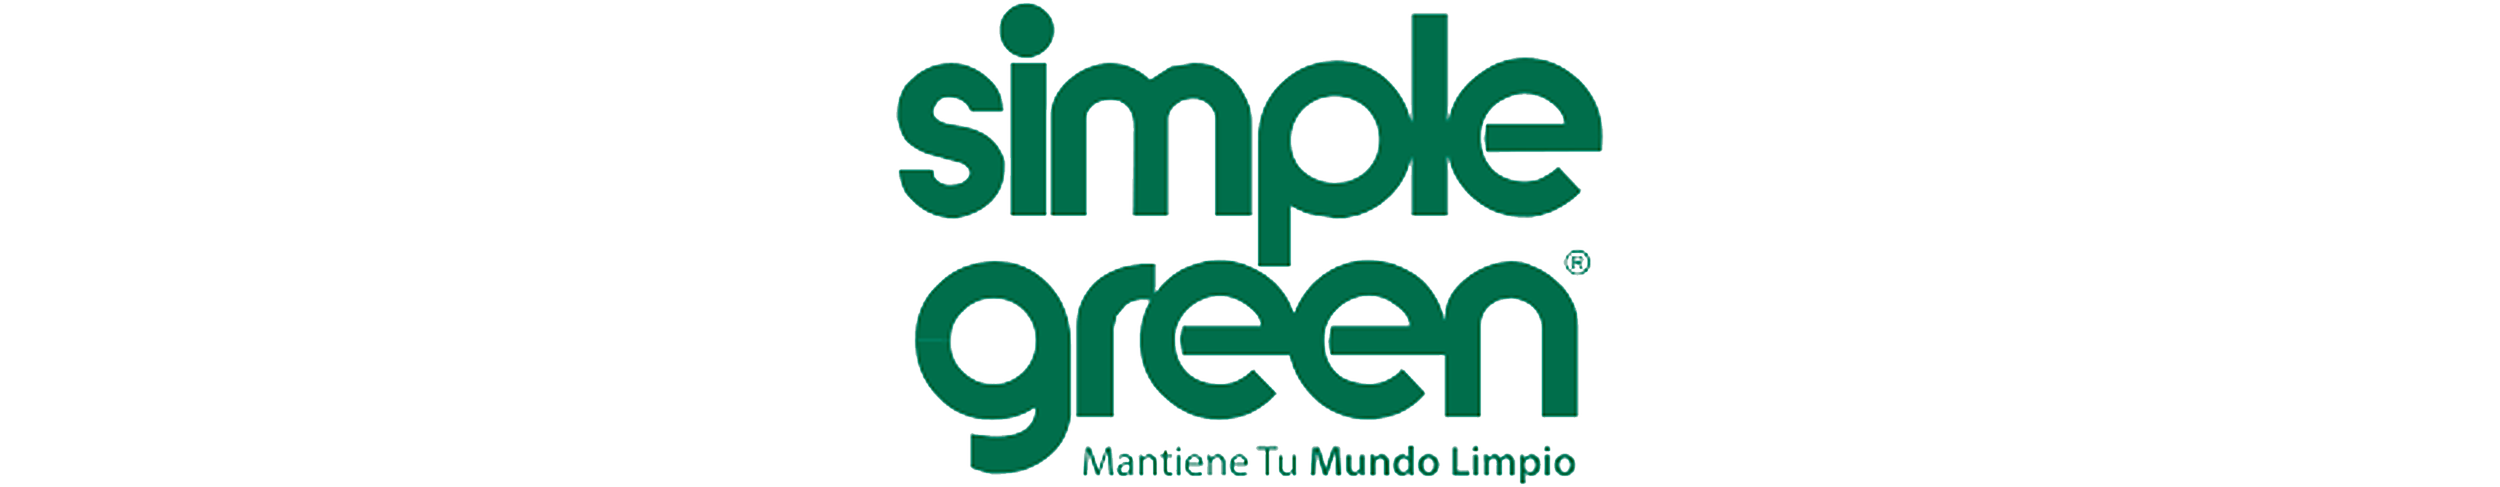 simple green.png